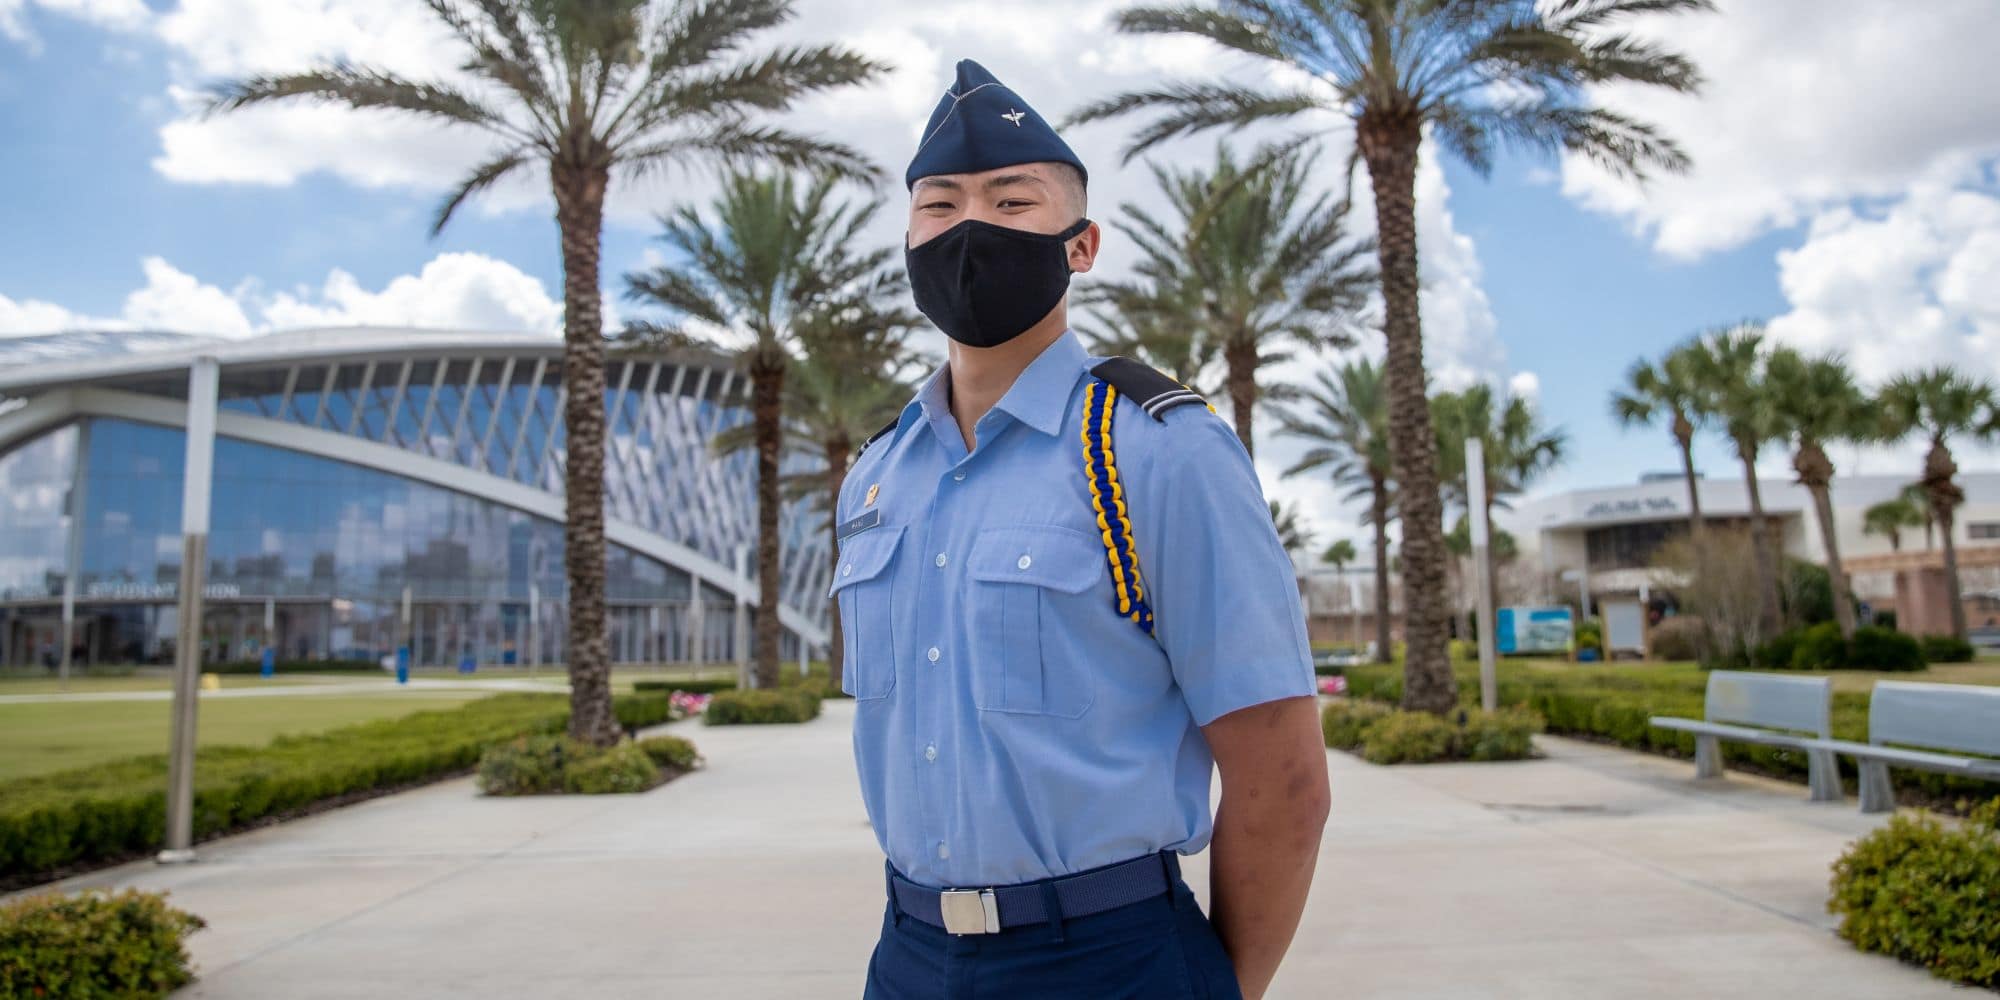 Andrew Wang, AFROTC Cadet on the Embry-Riddle Florida Campus